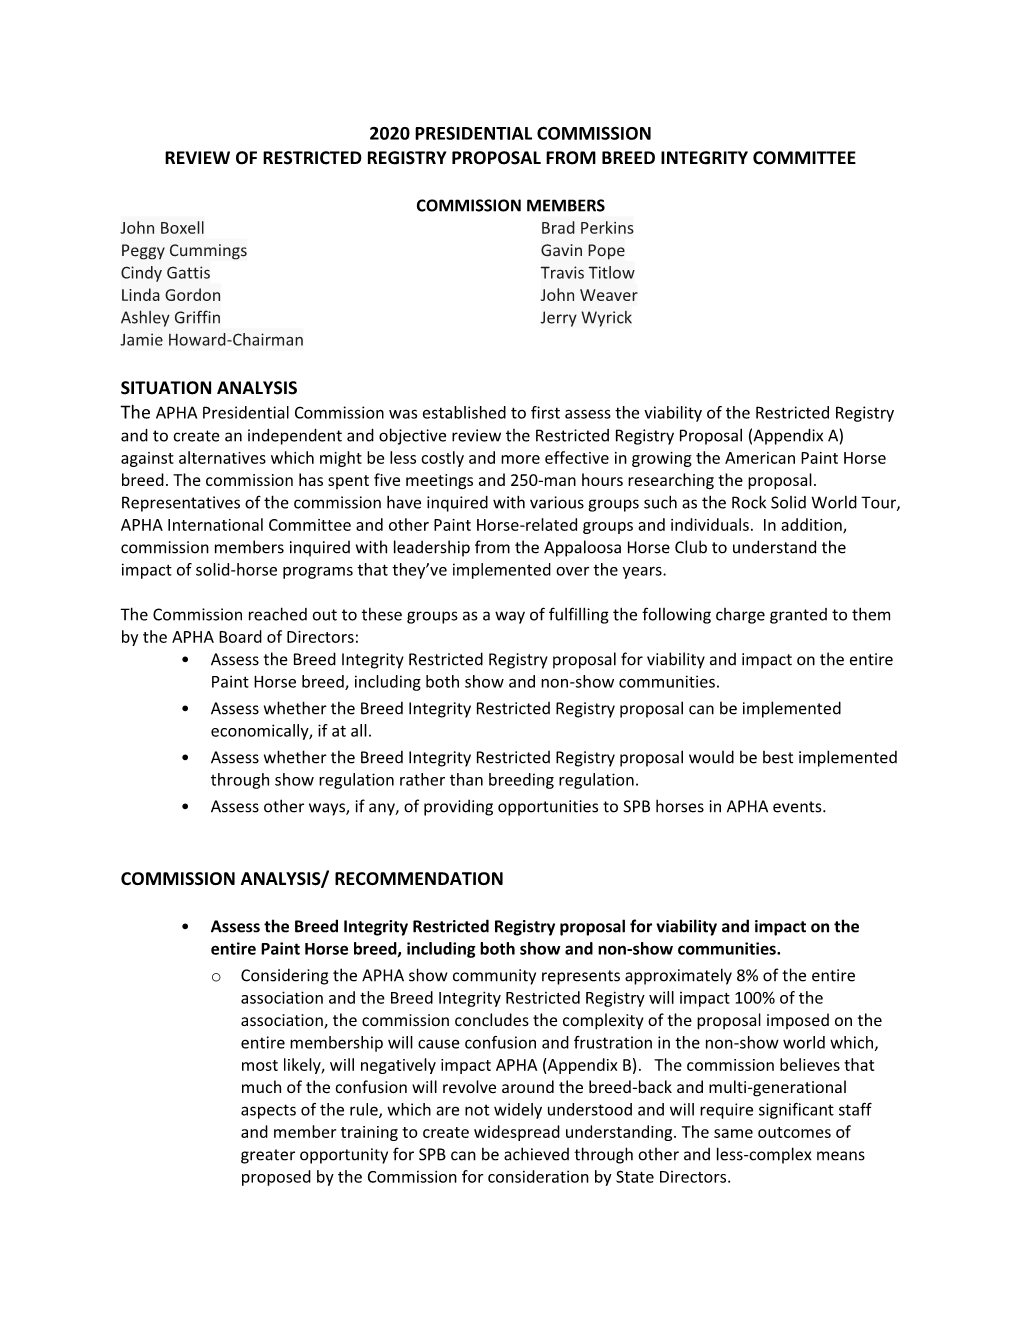 2020 Presidential Commission Review of Restricted Registry Proposal from Breed Integrity Committee